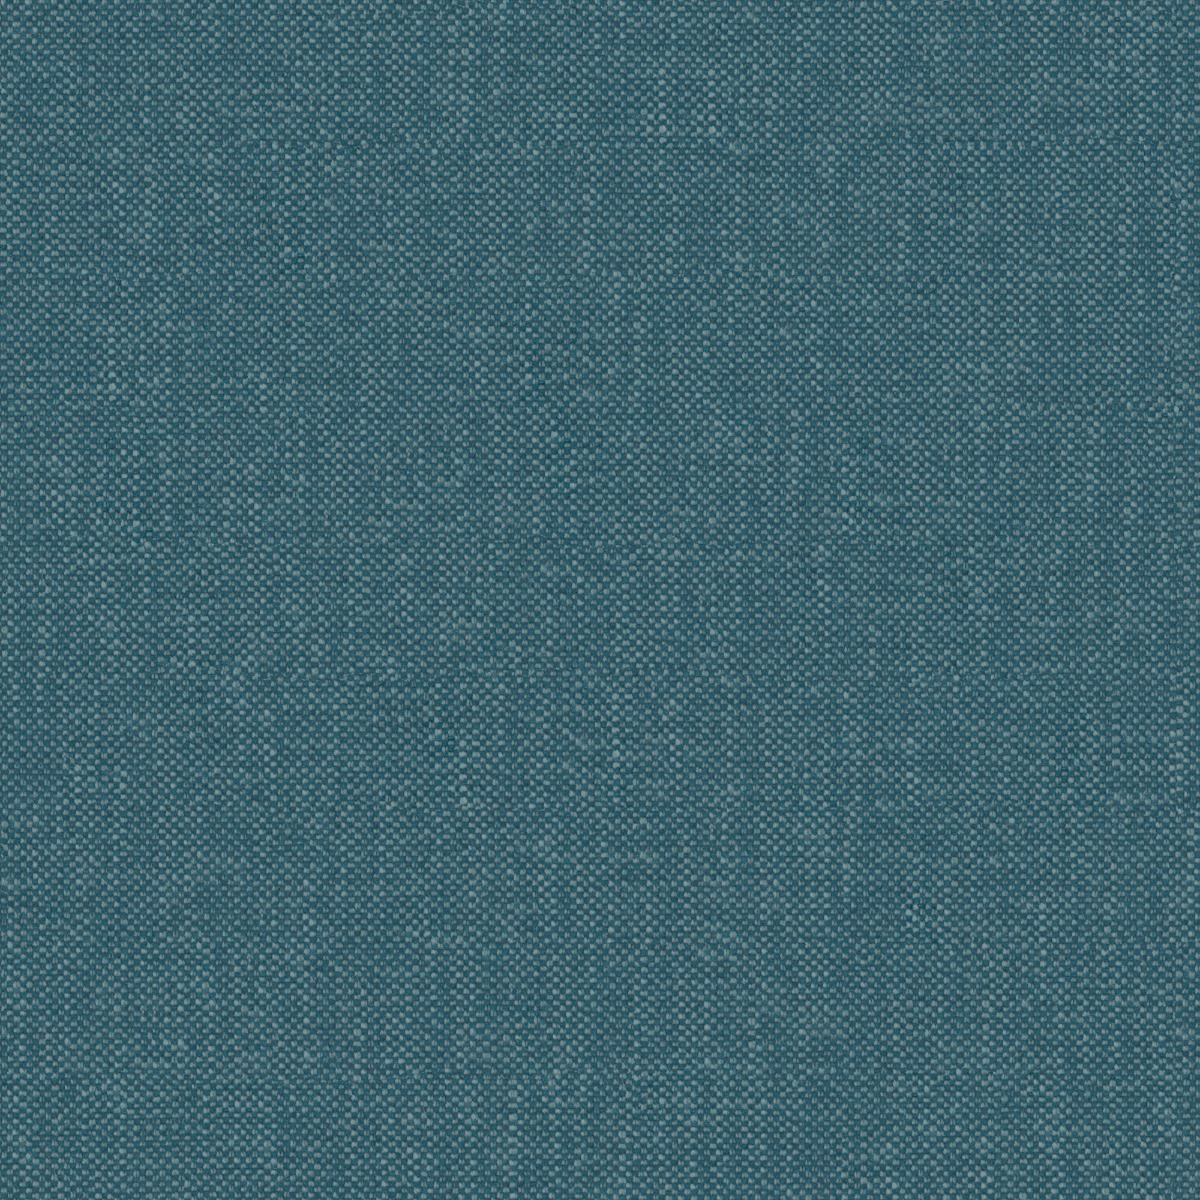 A seamless fabric texture with plain duckegg chenille units arranged in a None pattern